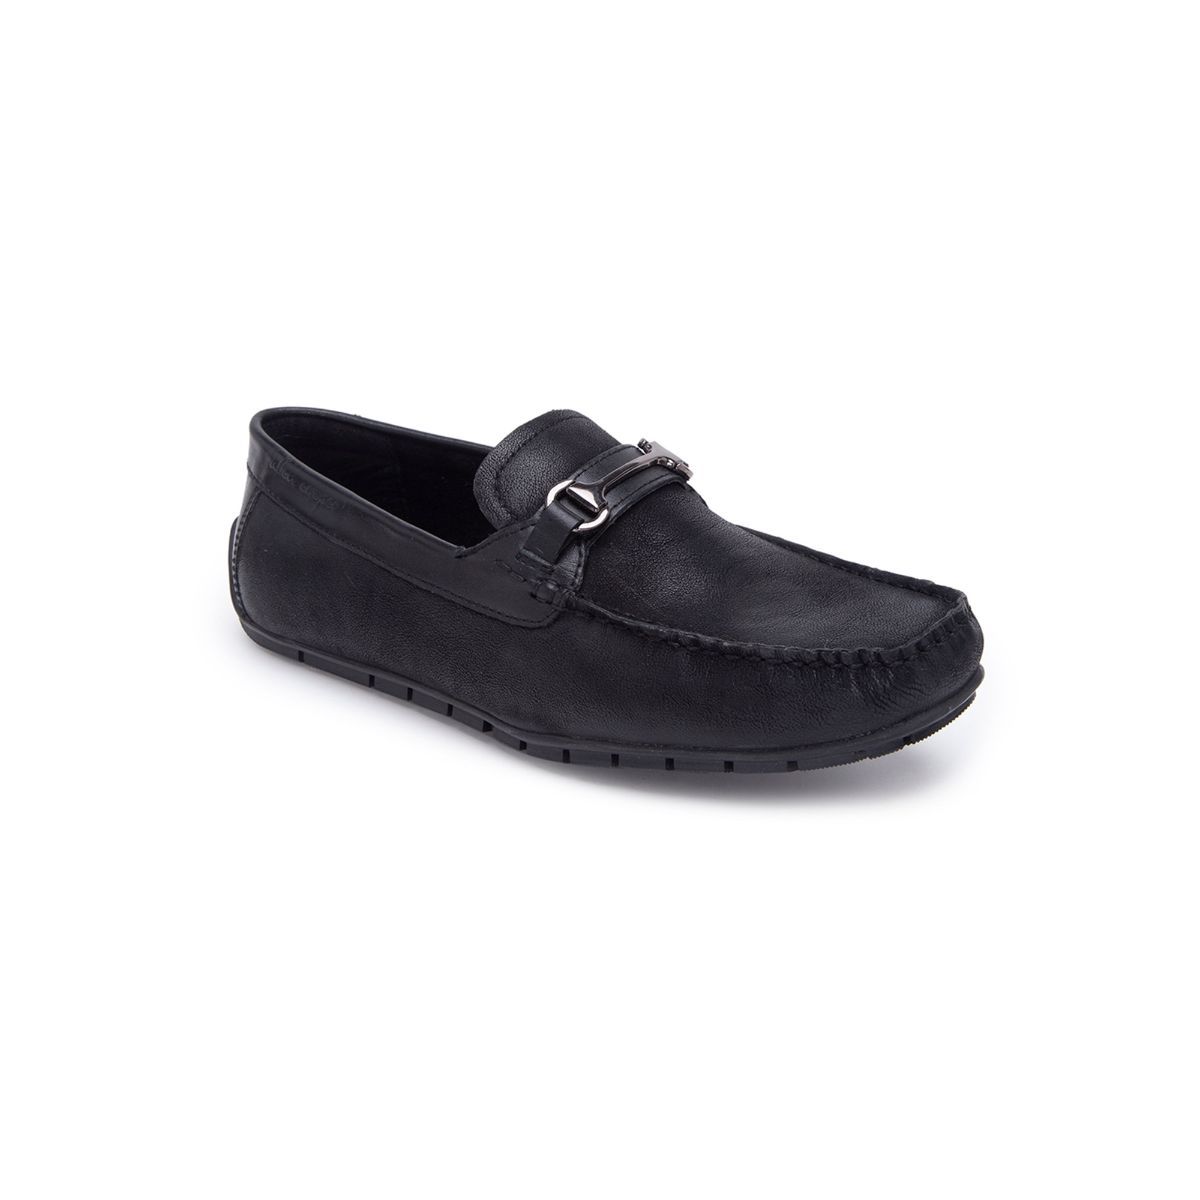 Allen Cooper Black Leather Casual Shoes - 8